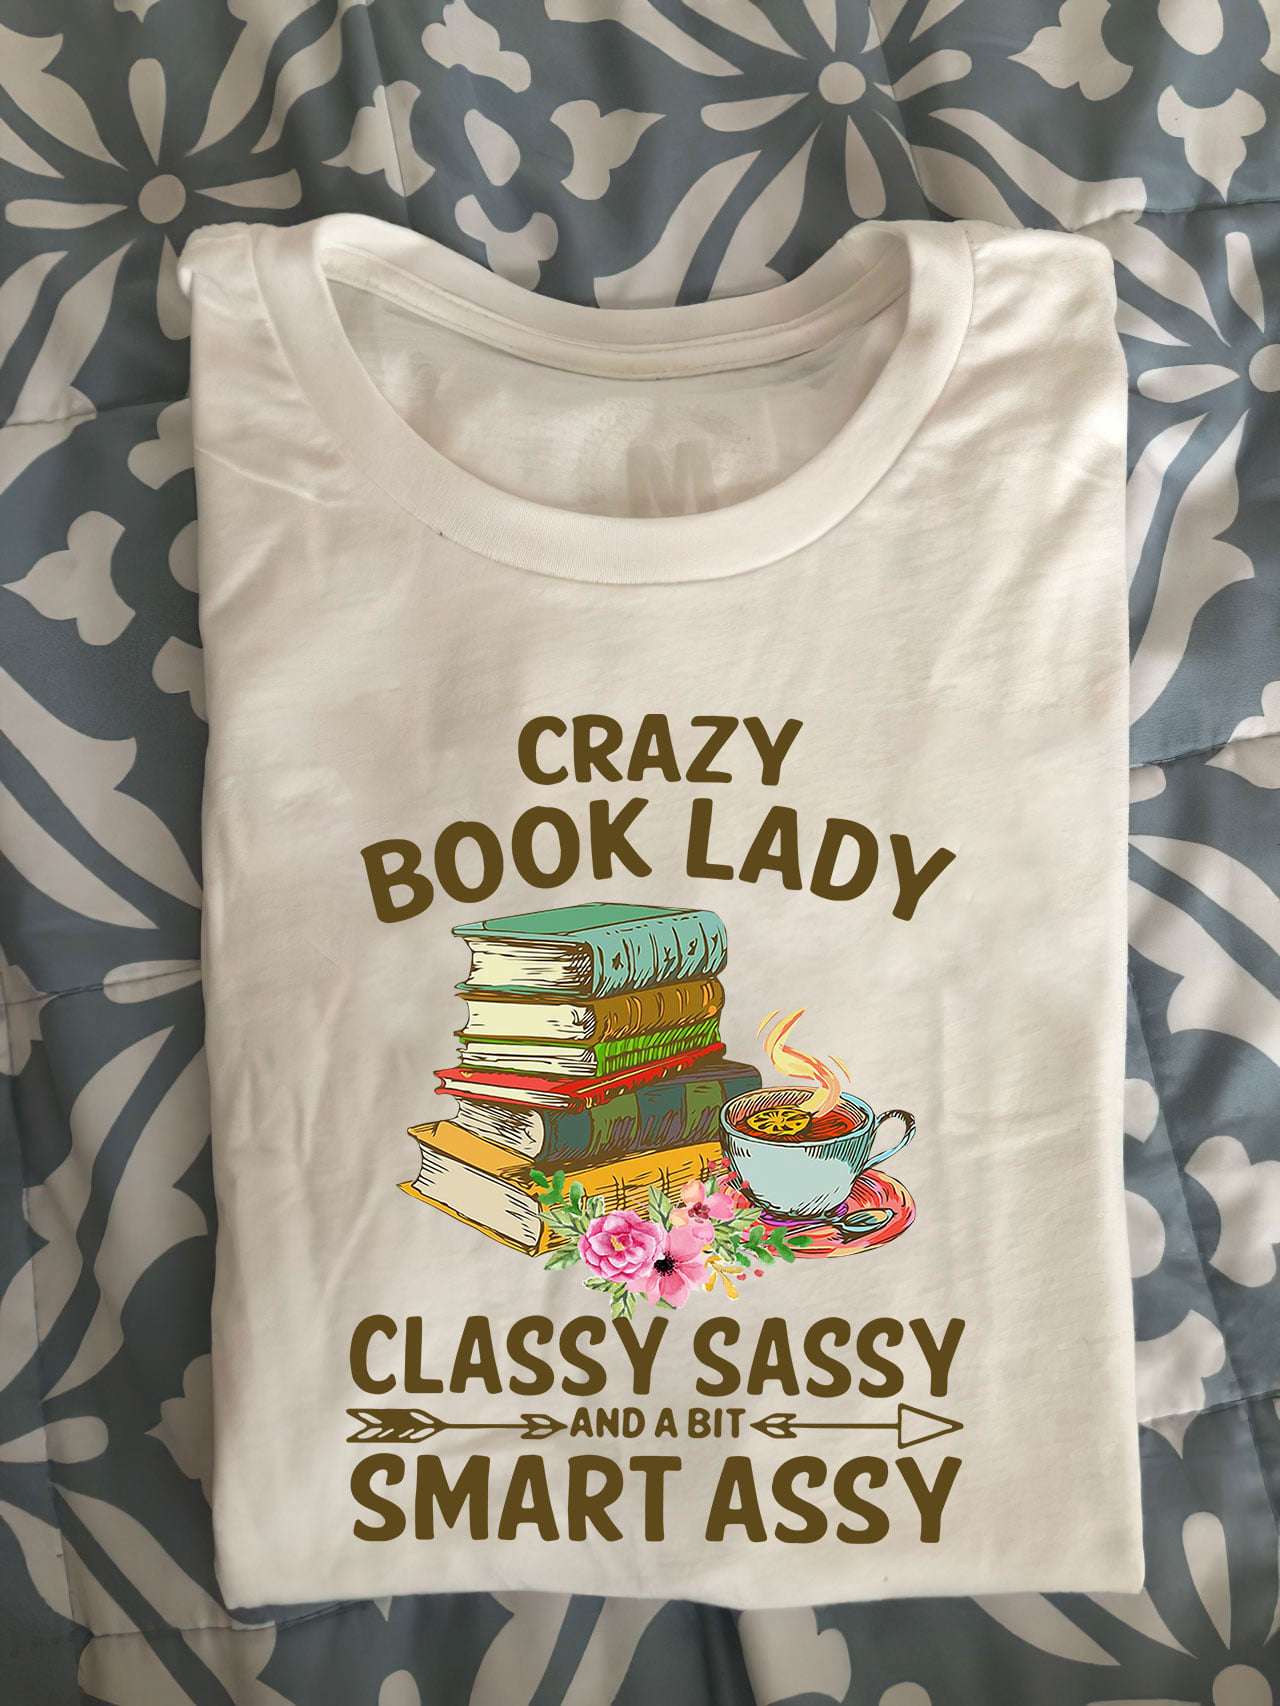 Crazy book lady - Classy sassy and a bit smart assy, book and coffee